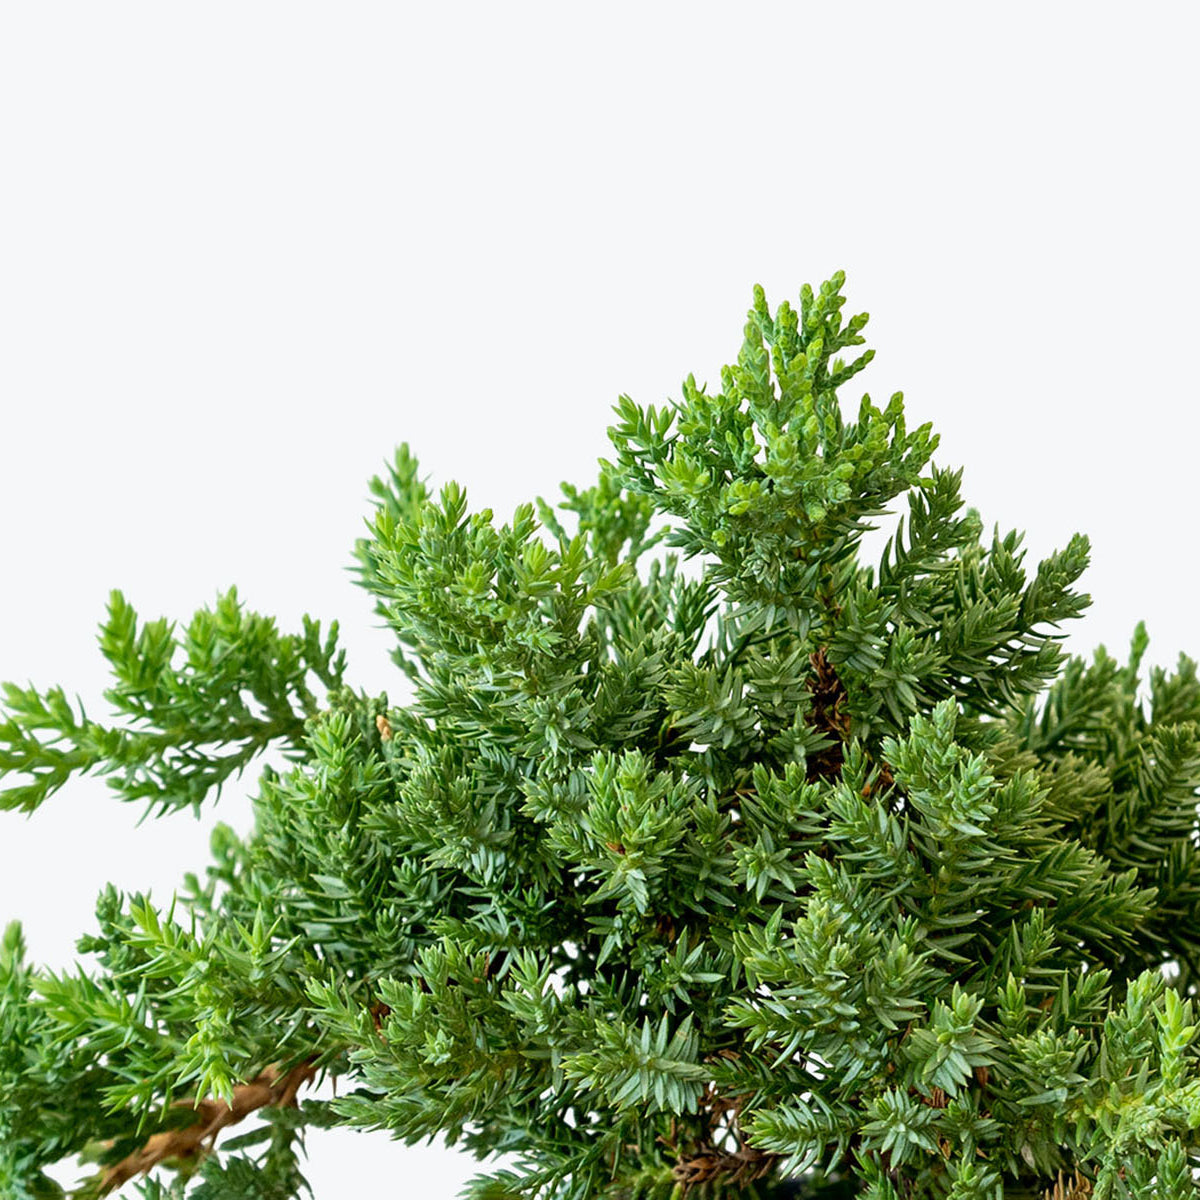 The Complete Juniper Bonsai Tree Plant Care Guide: Water, Light & Beyond